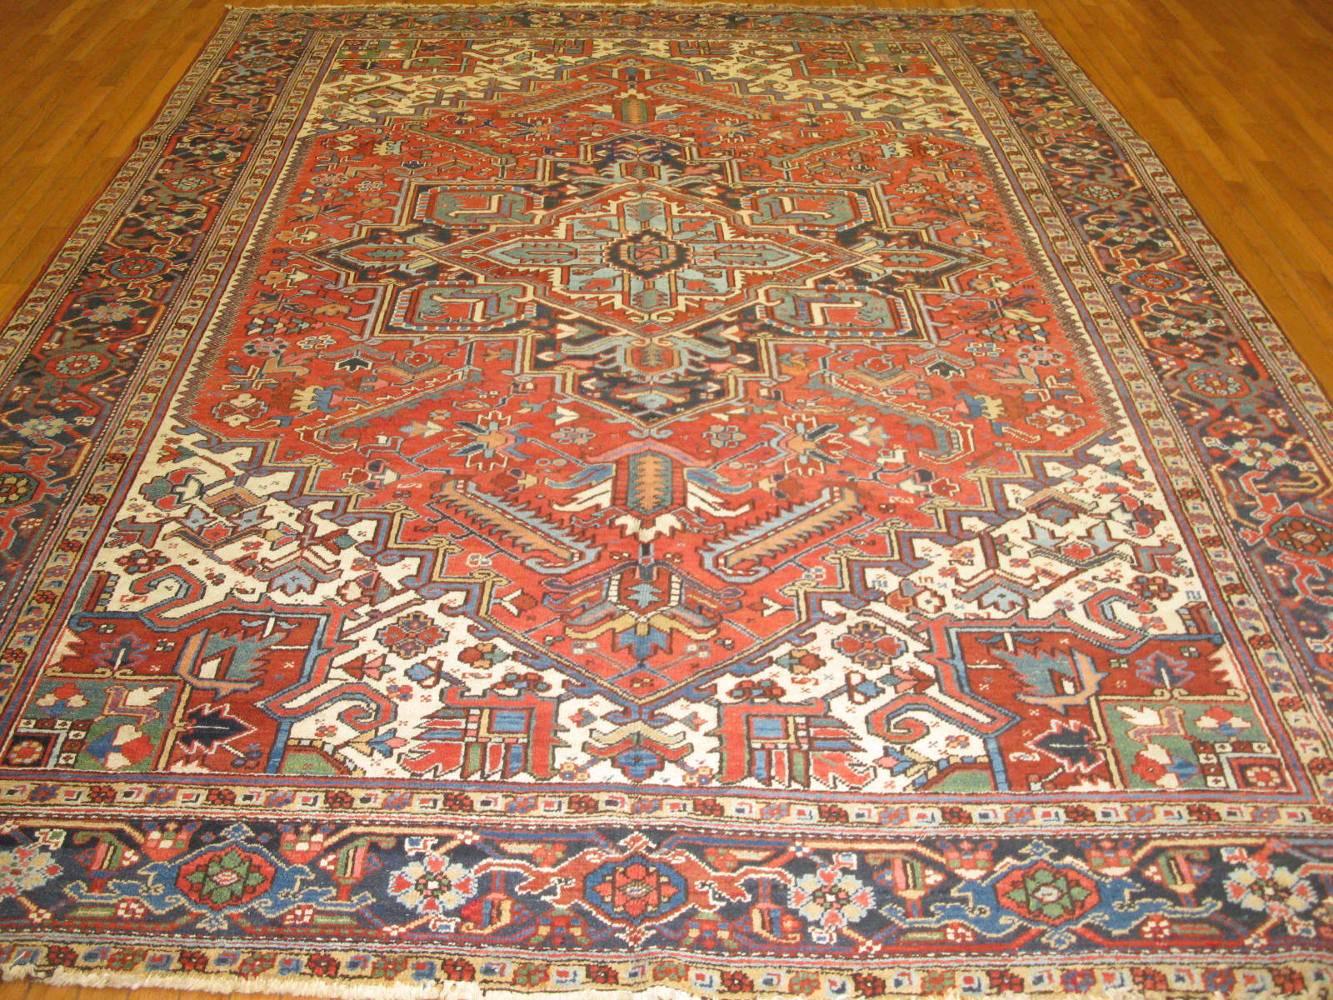 This is a beautiful antique hand-knotted rug from the infamous village of Heriz in northwest Iran. The rug has the traditional geometric design. It is a very easy and sought after rug to work with. It measures 8.5” x 11.5” and in great condition.